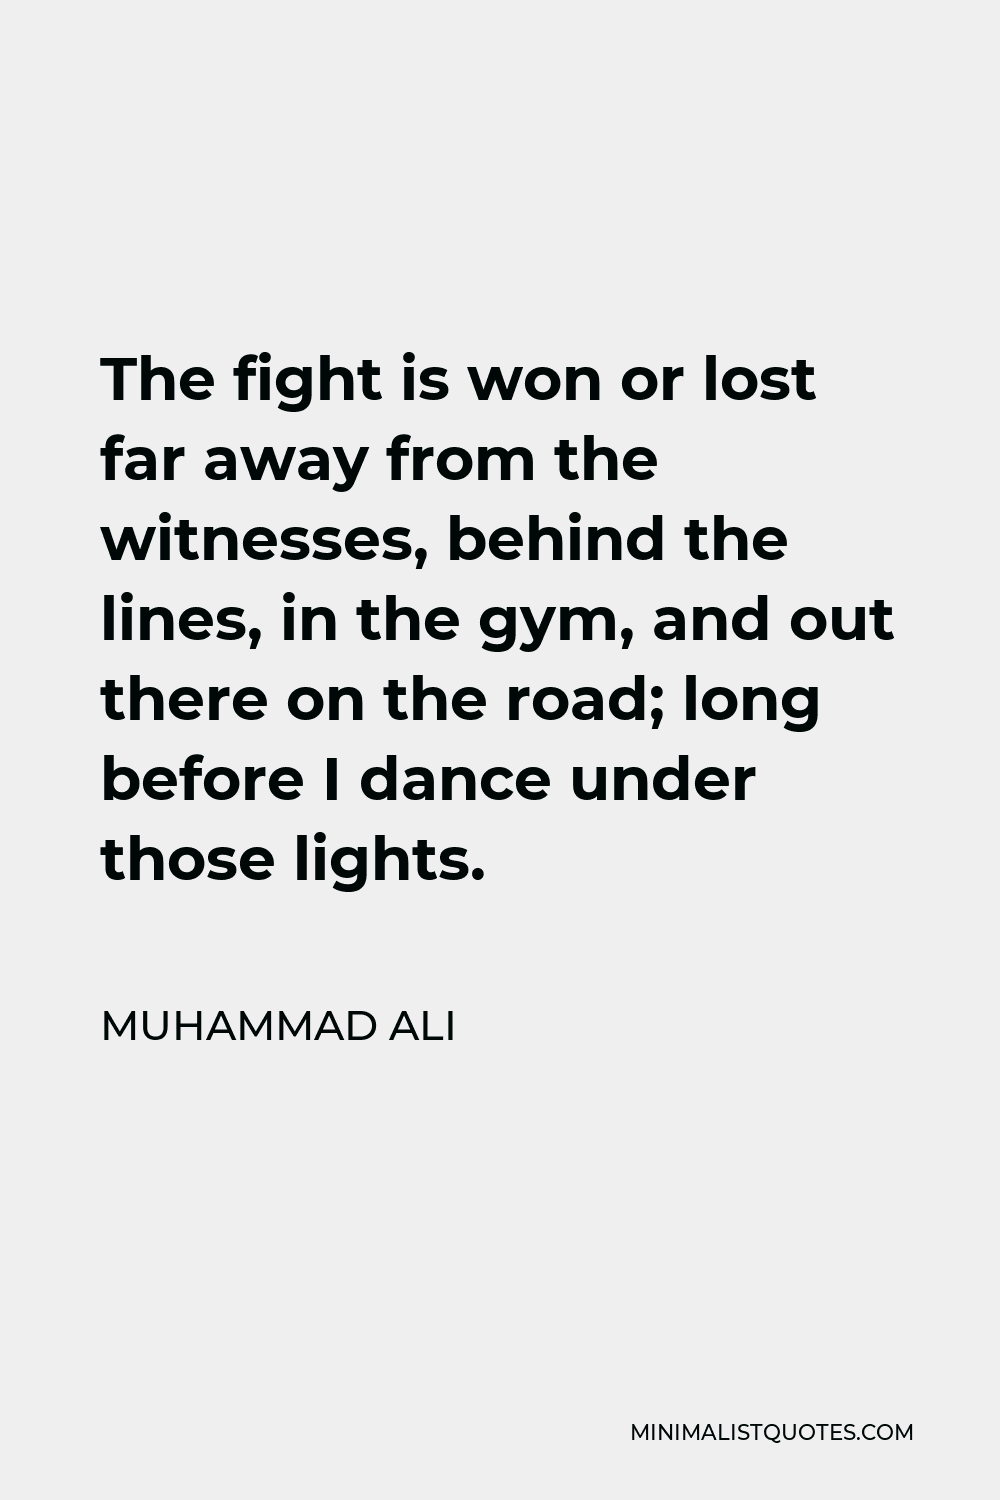 Muhammad Ali Quote - The fight is won or lost far away from the witnesses, behind the lines, in the gym, and out there on the road; long before I dance under those lights.